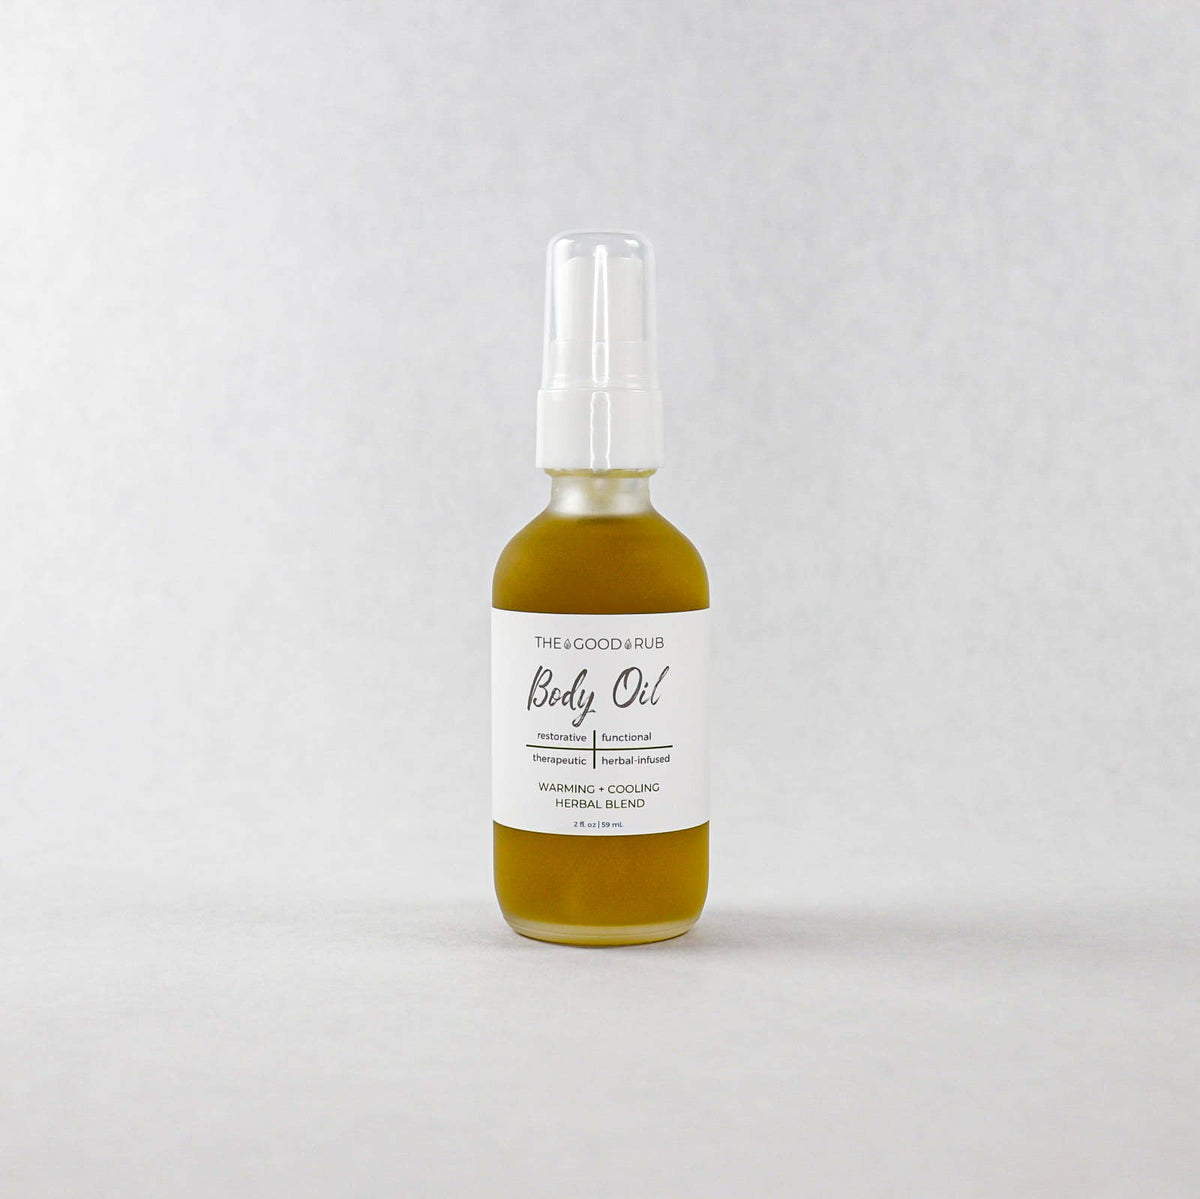 Warming + Cooling Body Oil